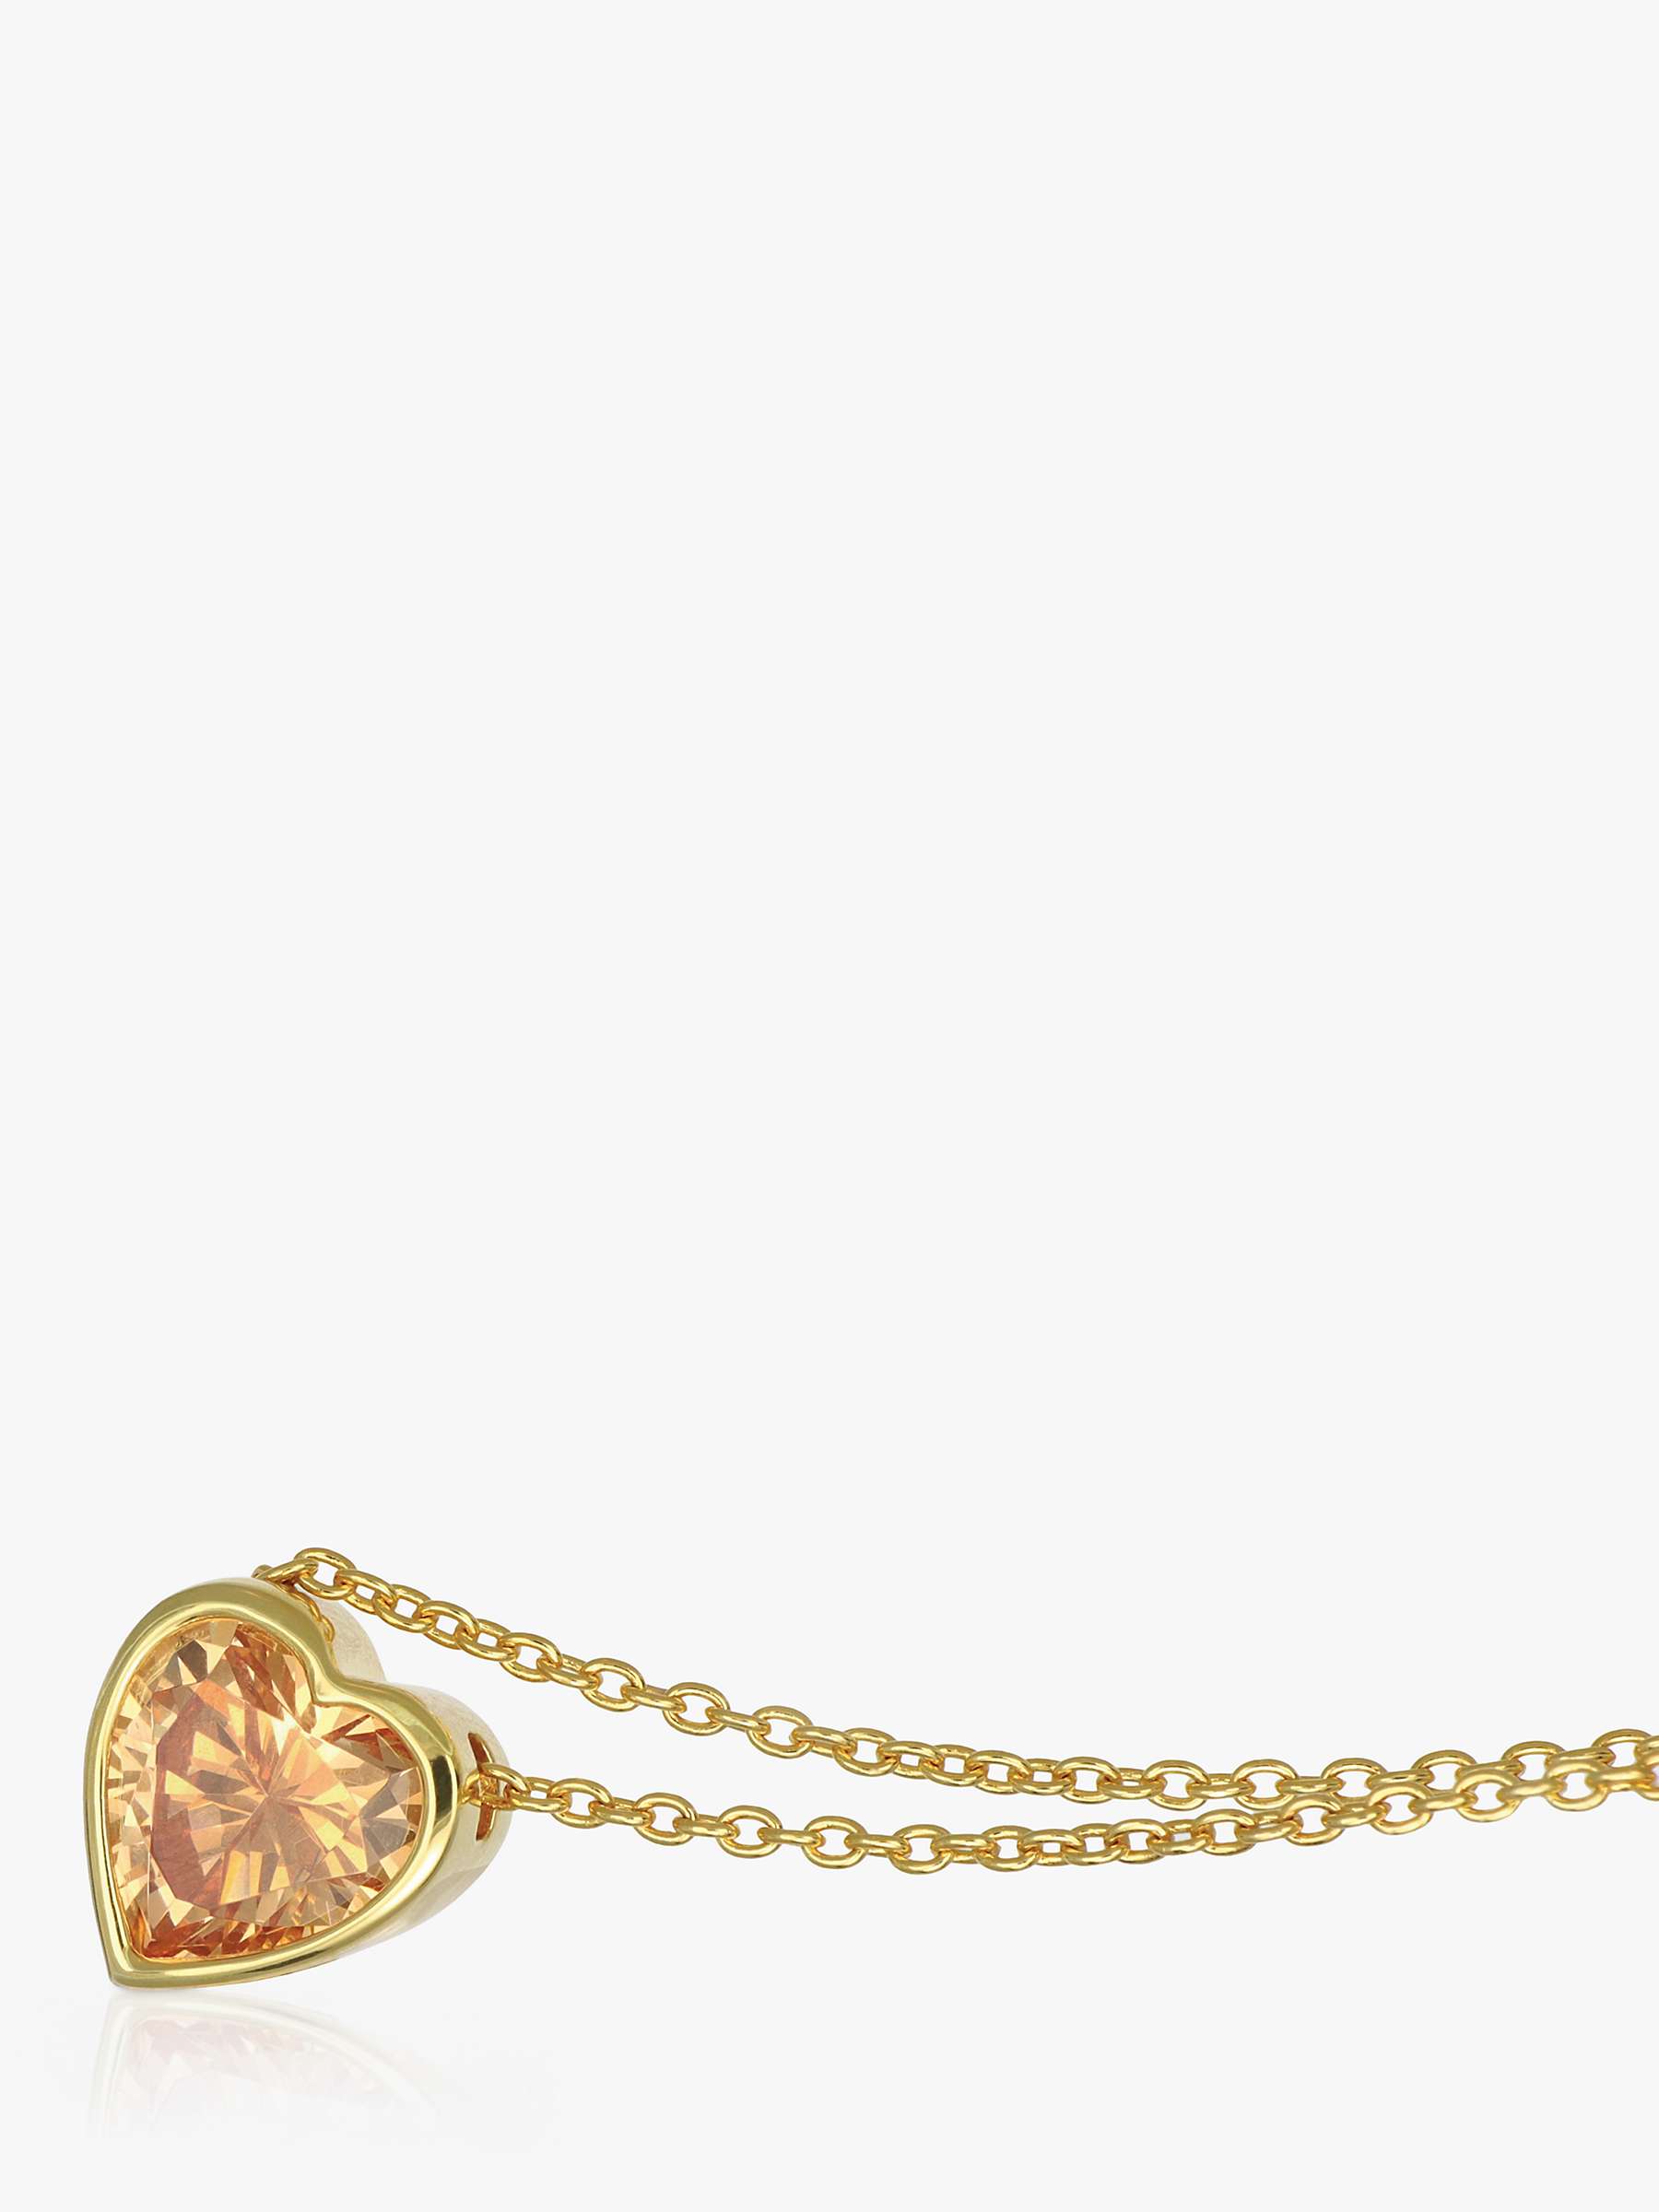 Buy Sif Jakobs Jewellery Amorino Cubic Zirconia Heart Pendant Necklace, Gold Online at johnlewis.com